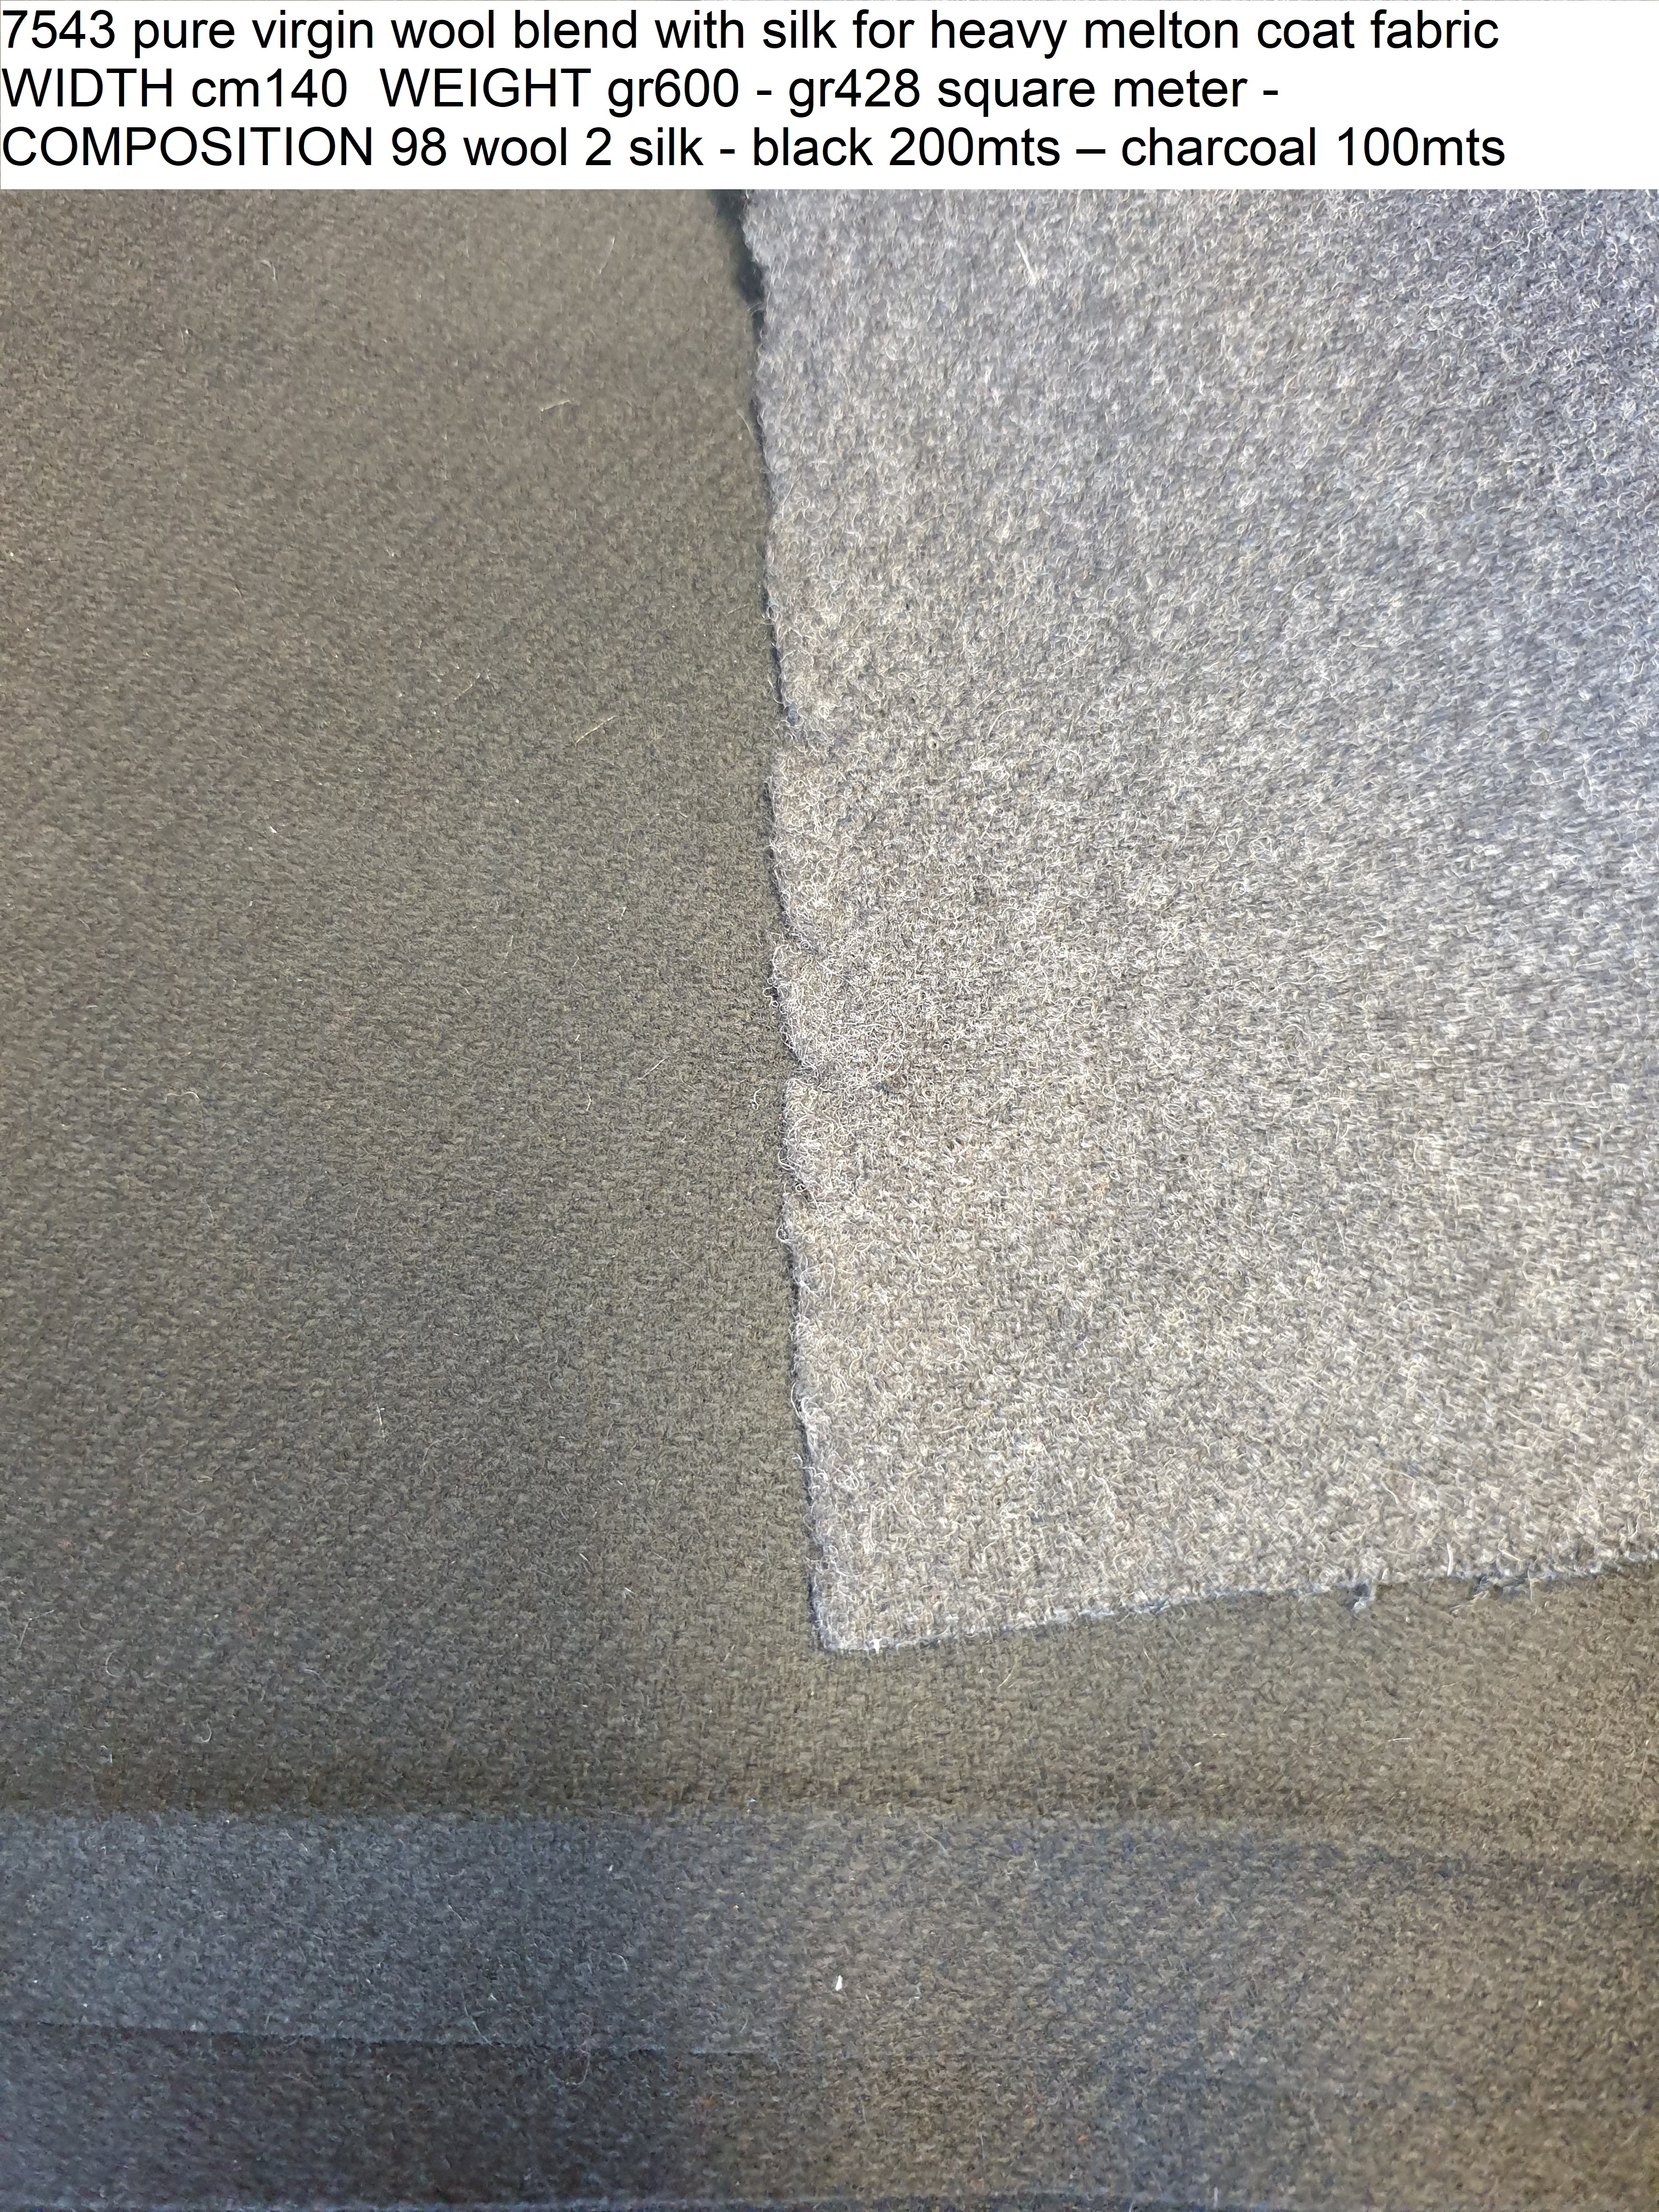 7543 pure virgin wool blend with silk for heavy melton coat fabric WIDTH cm140 WEIGHT gr600 - gr428 square meter - COMPOSITION 98 wool 2 silk - black 200mts – charcoal 100mts